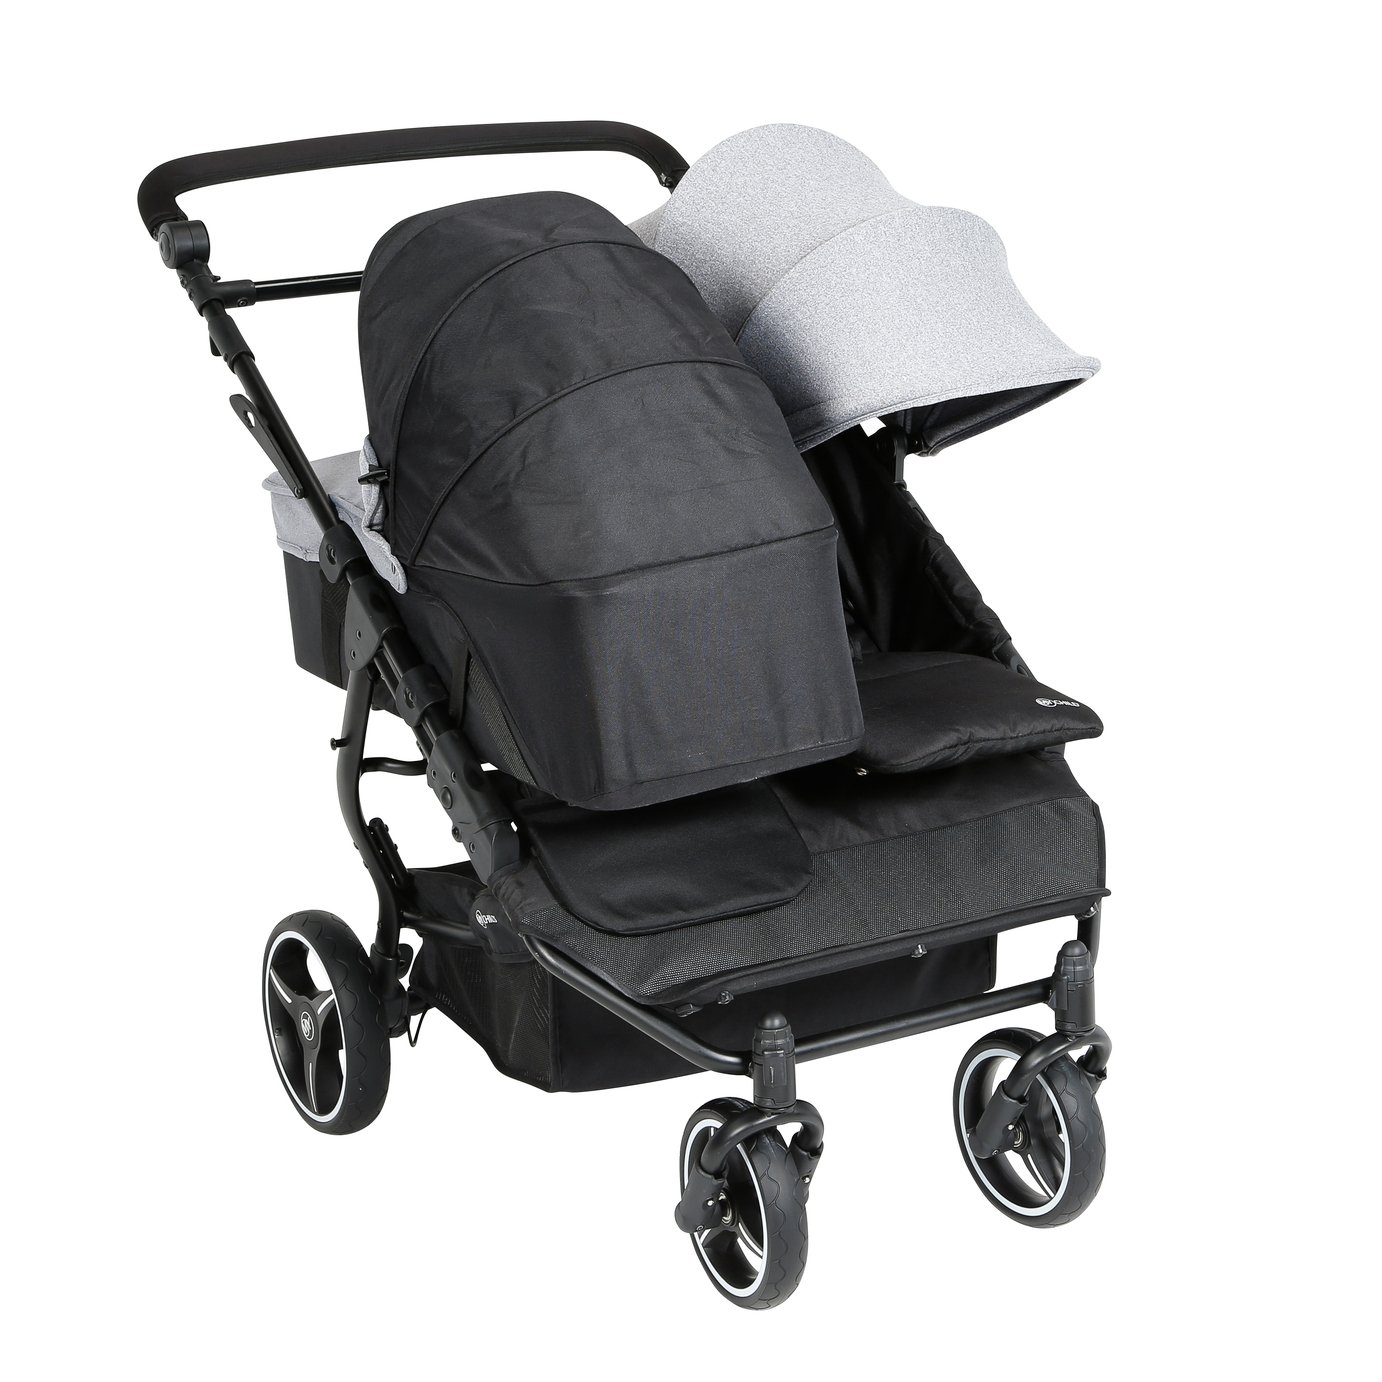 MyChild Easy Twin Second Carrycot Review